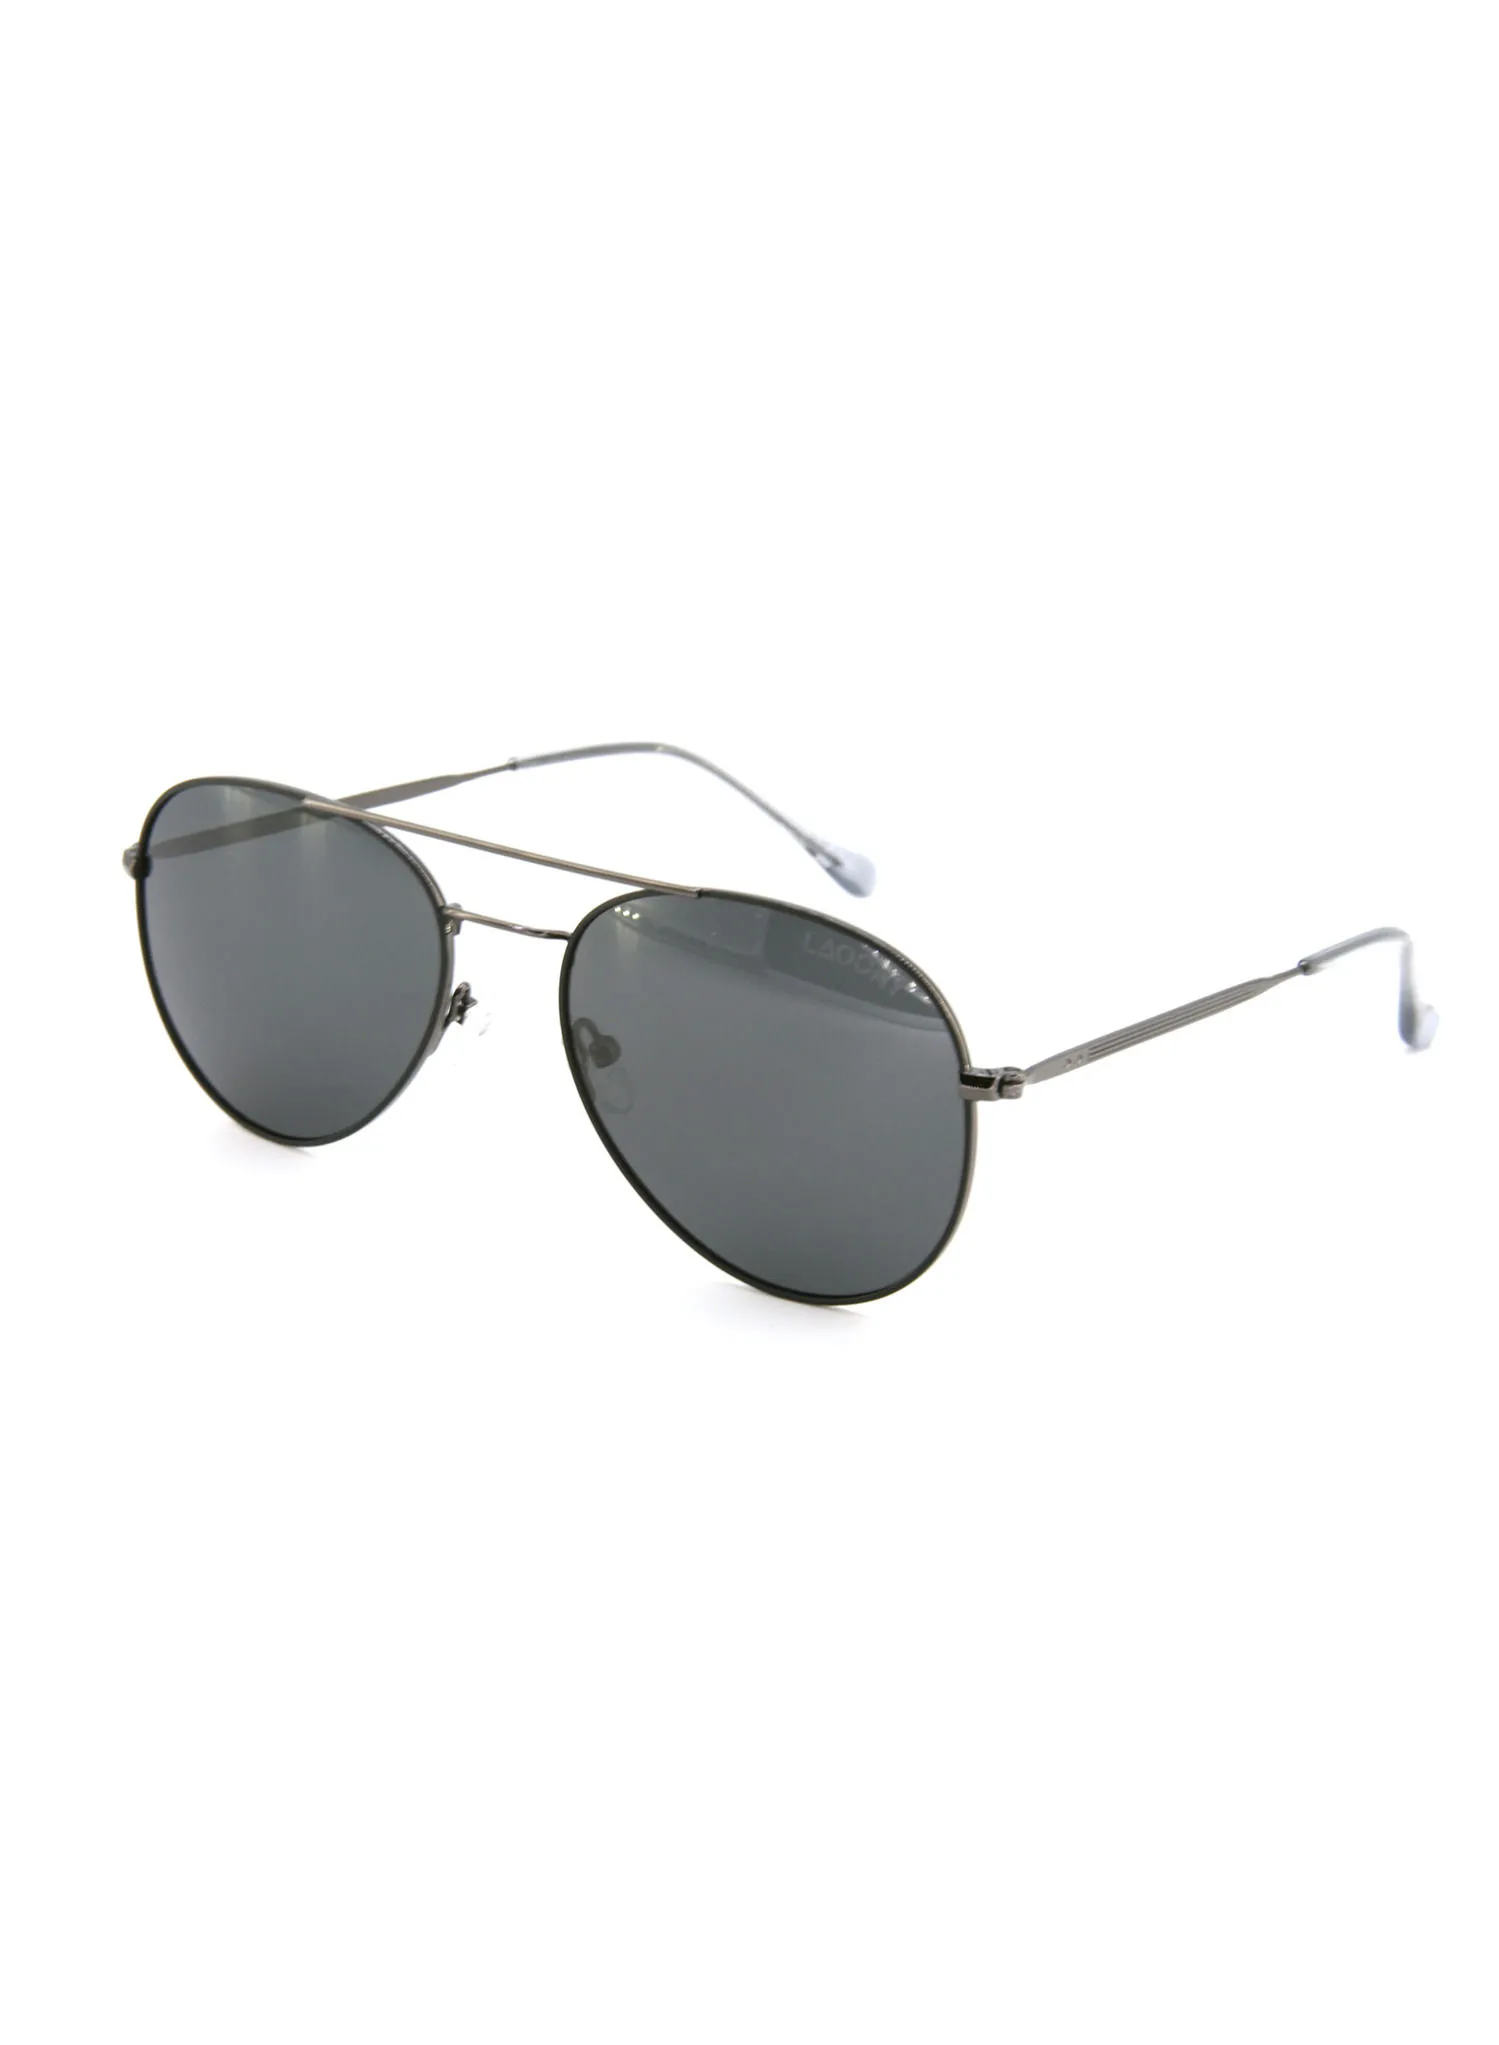 LAOONT New Design Aviator Sunglasses Frame With Polarized Lenses